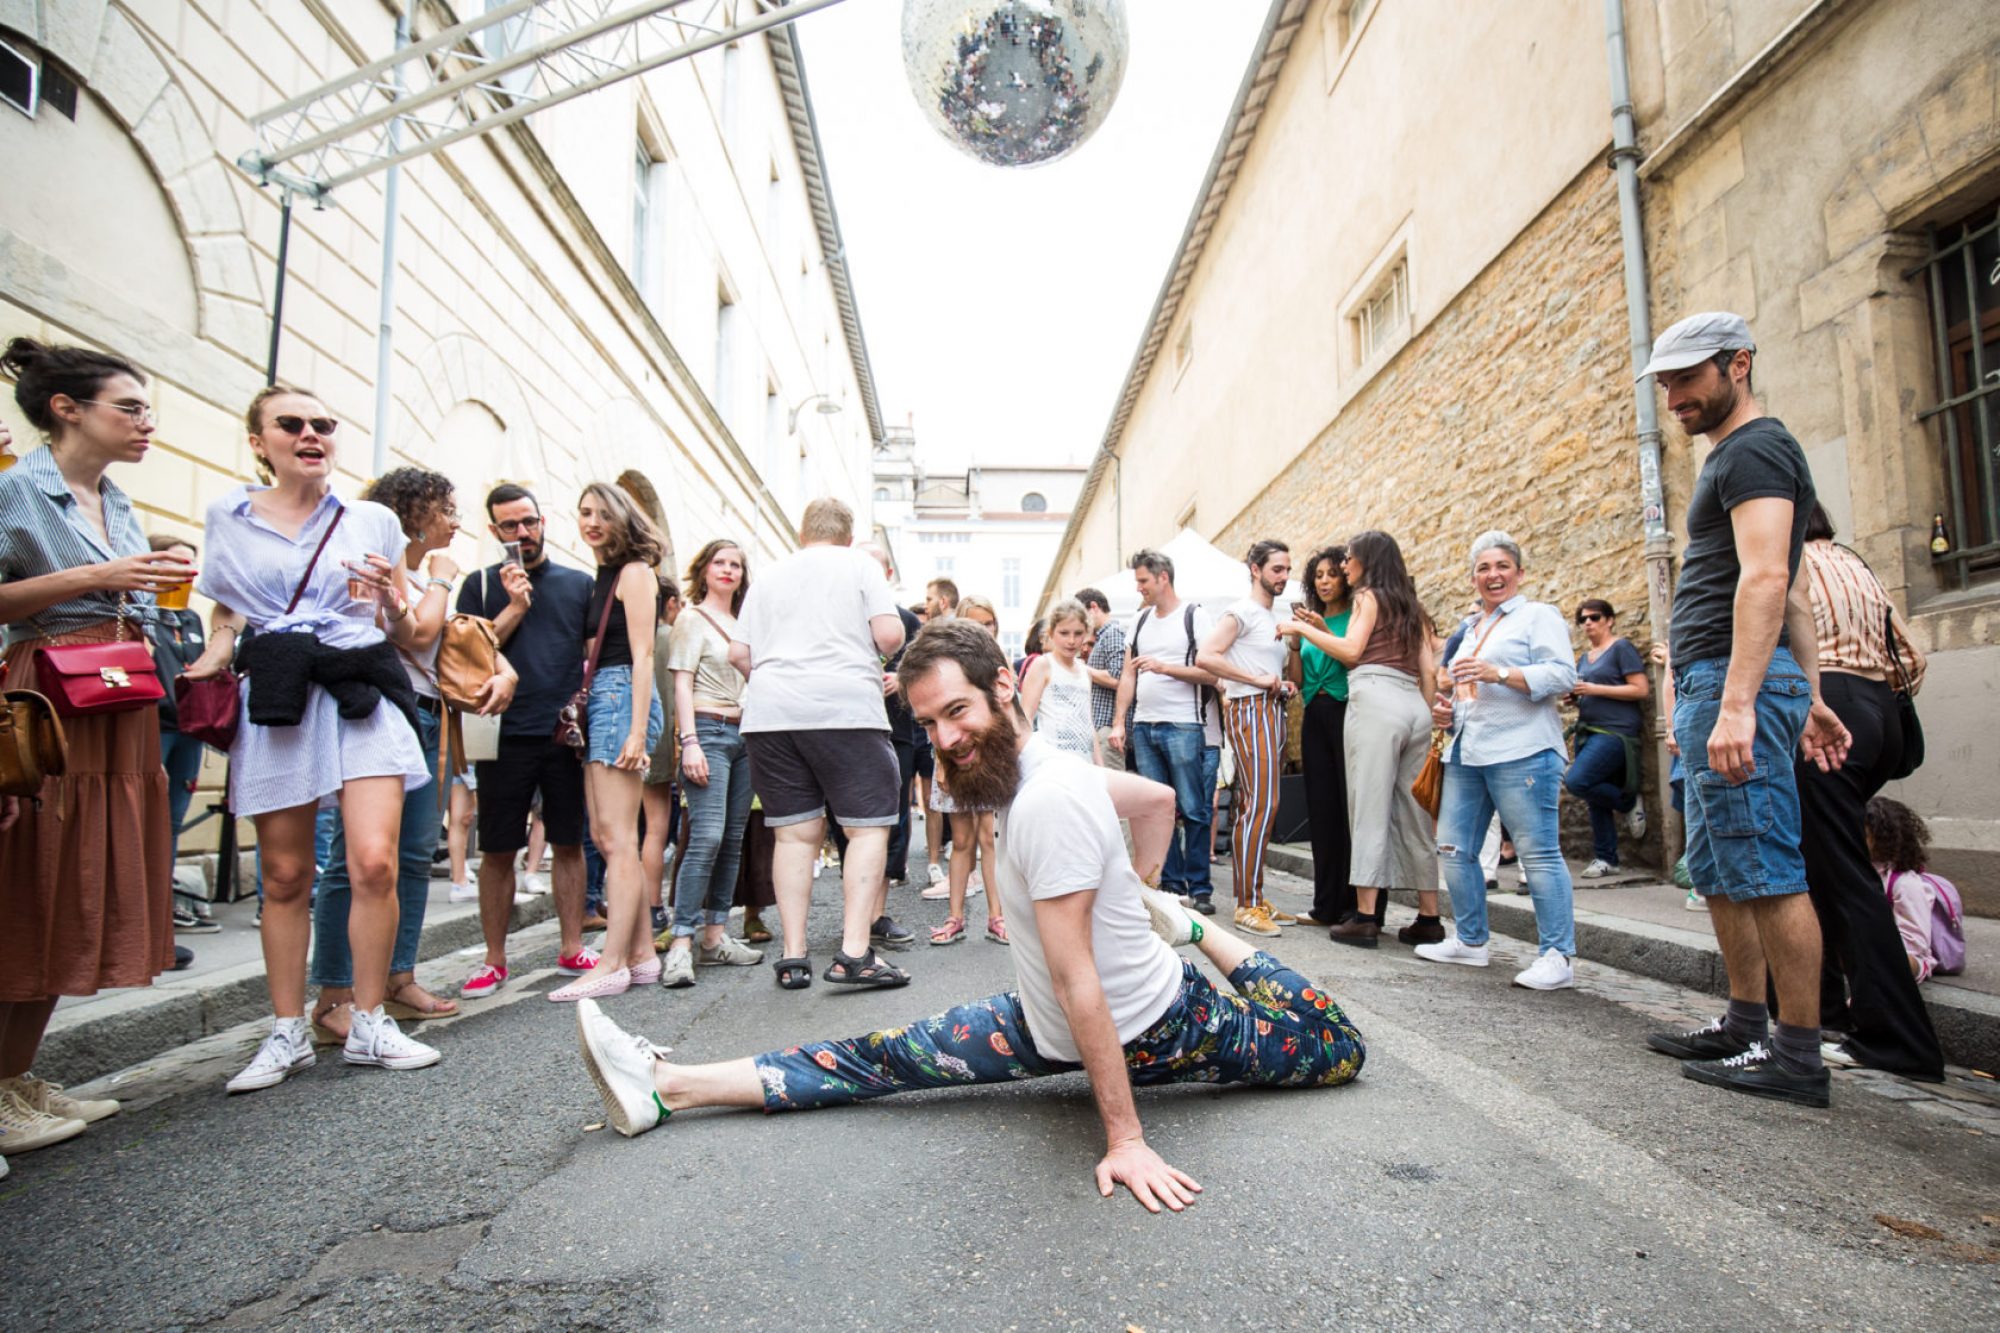 Extra nuits sonores 2019